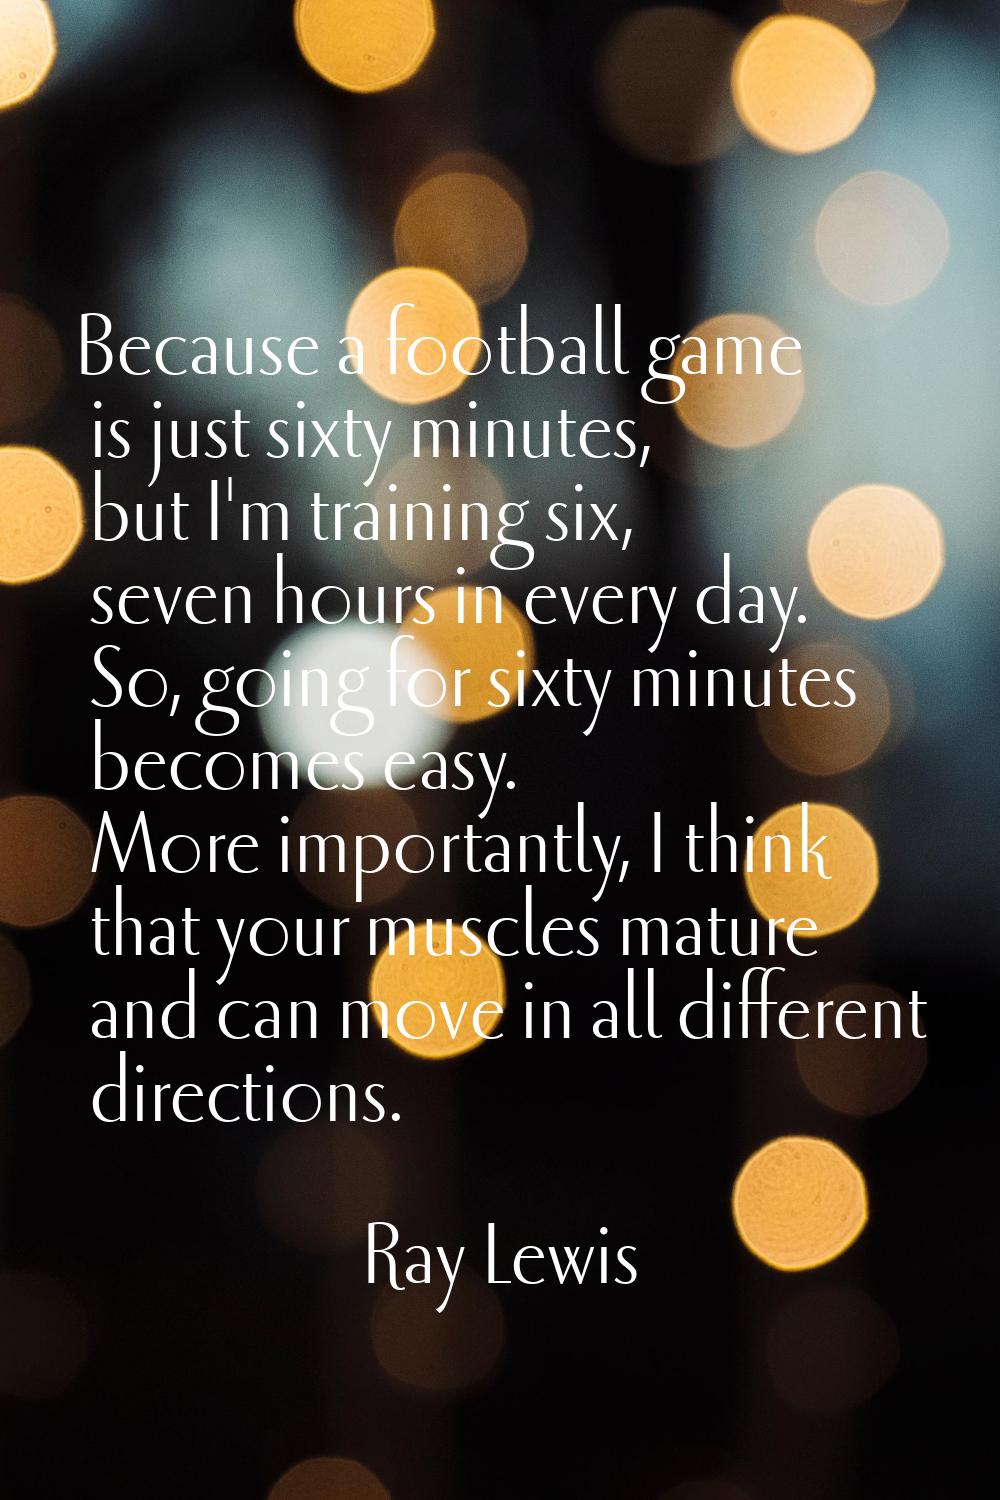 Because a football game is just sixty minutes, but I'm training six, seven hours in every day. So, 